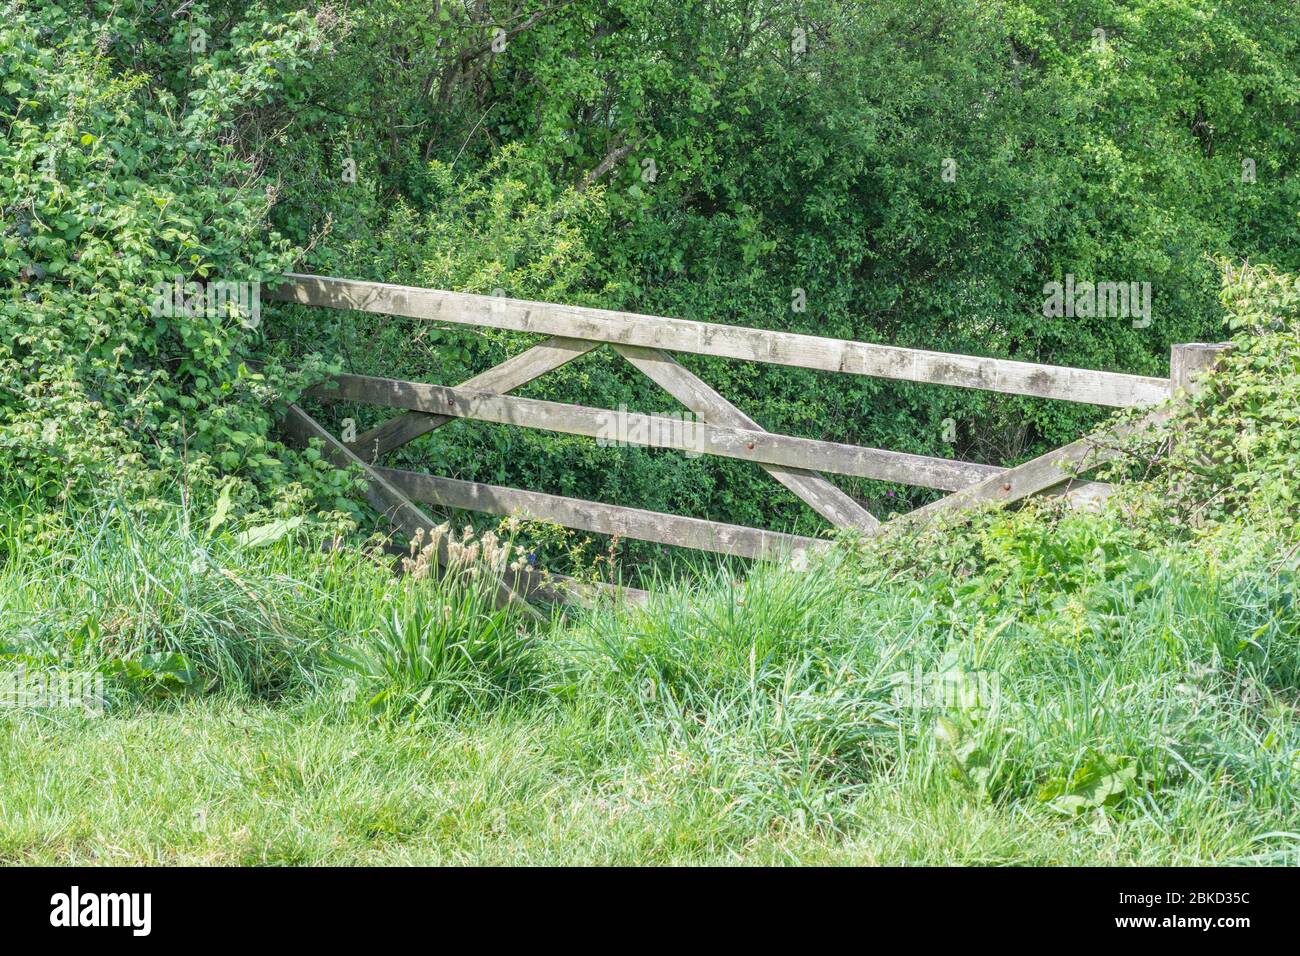 Large wooden farm gate with strengthening cross braces and engulfed by typical agricultural weeds and grasses. Metaphor  forgotten corner, barrier Stock Photo